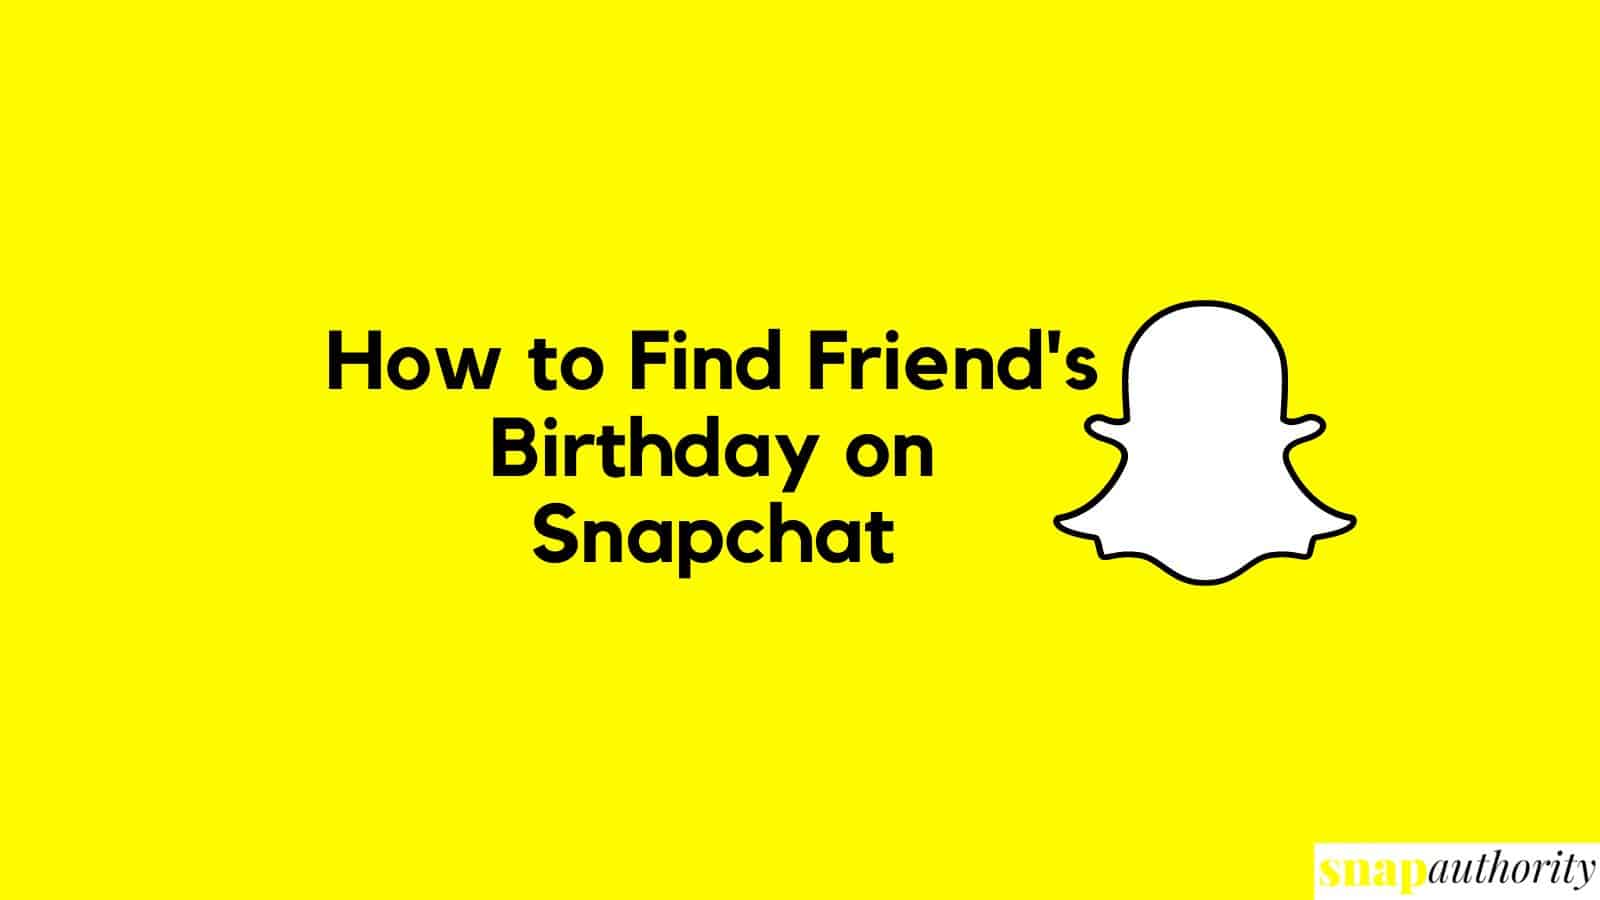 How to Find Friend's Birthday on Snapchat